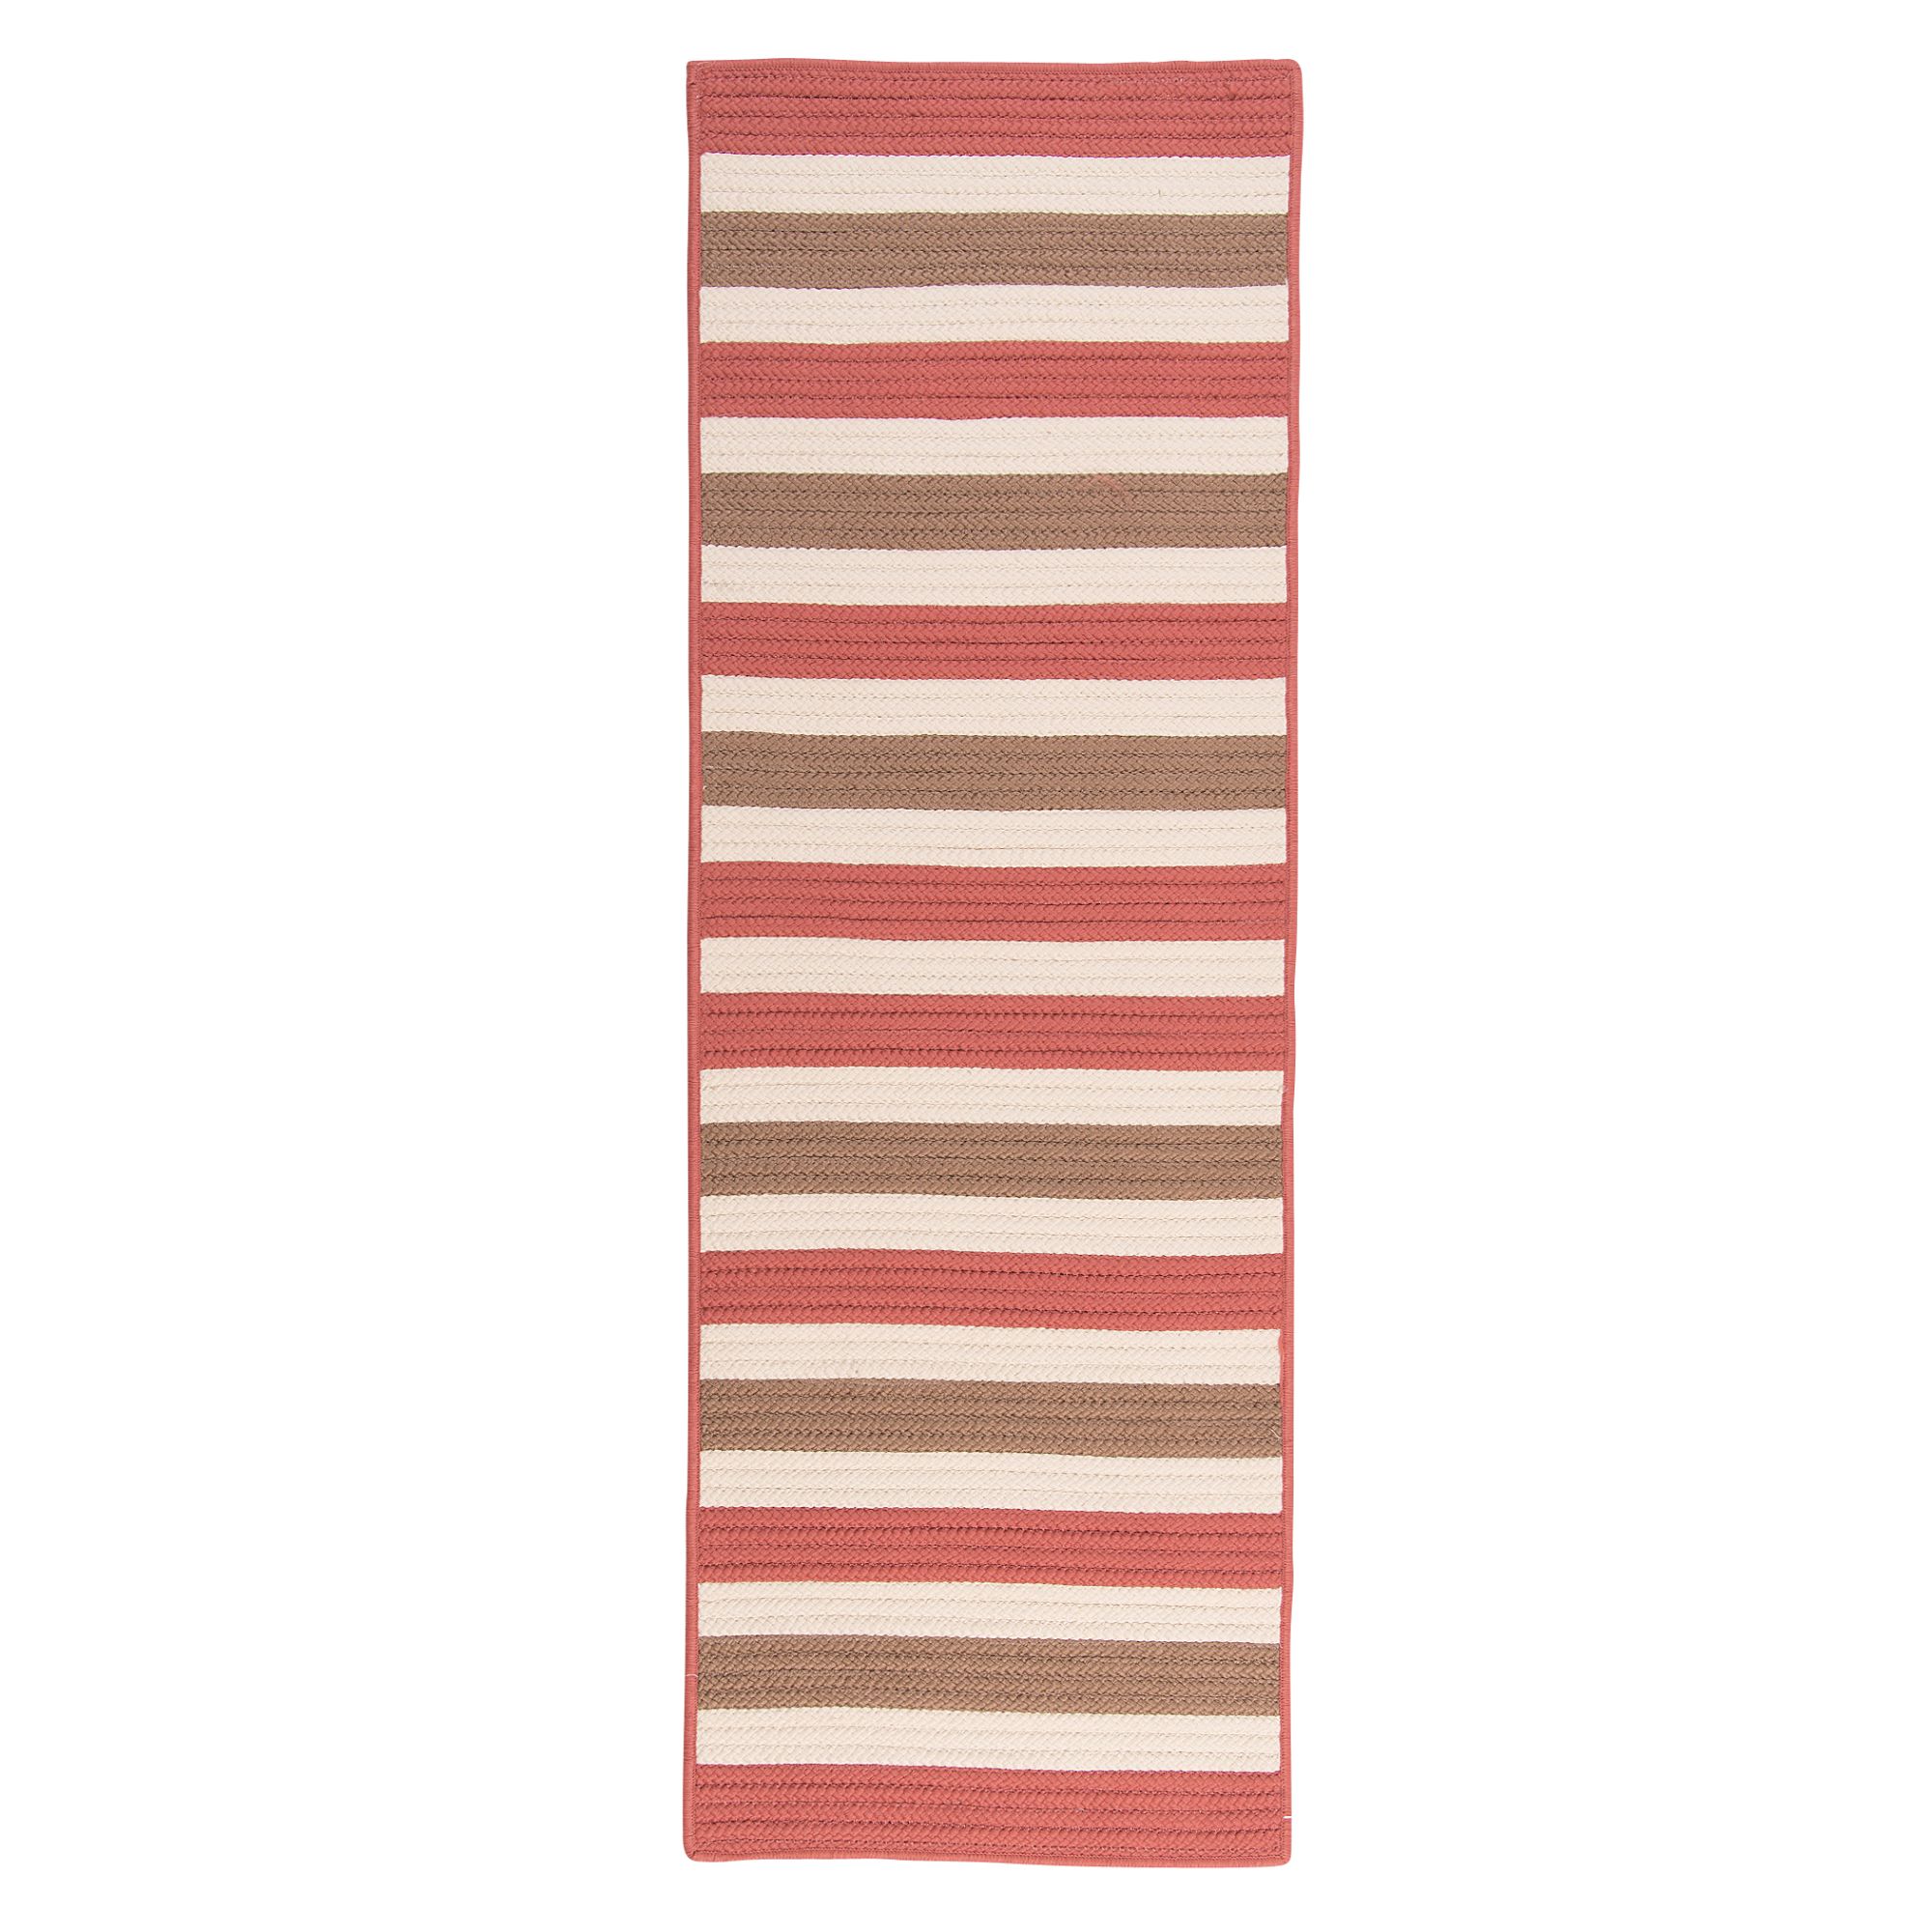 Brown Striped Outdoor Area Throw Rug Runner, Red And White Striped Rug Runner